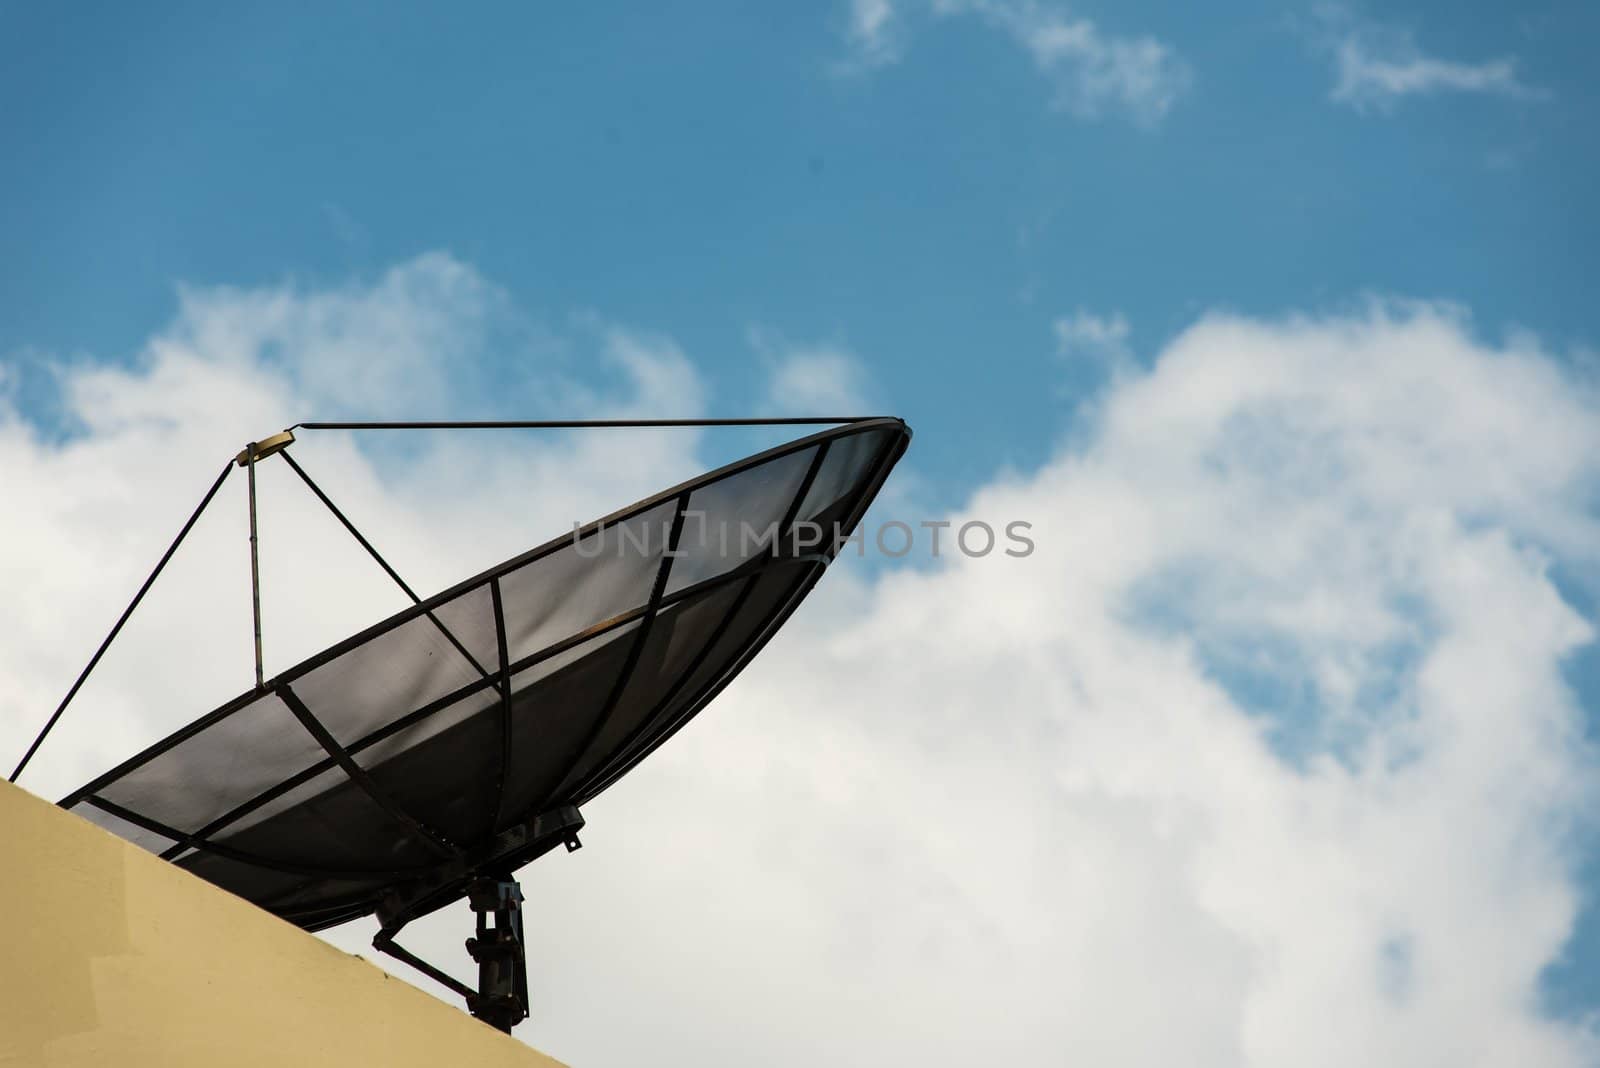 Black cable television satellite dish on the roof with blue sky